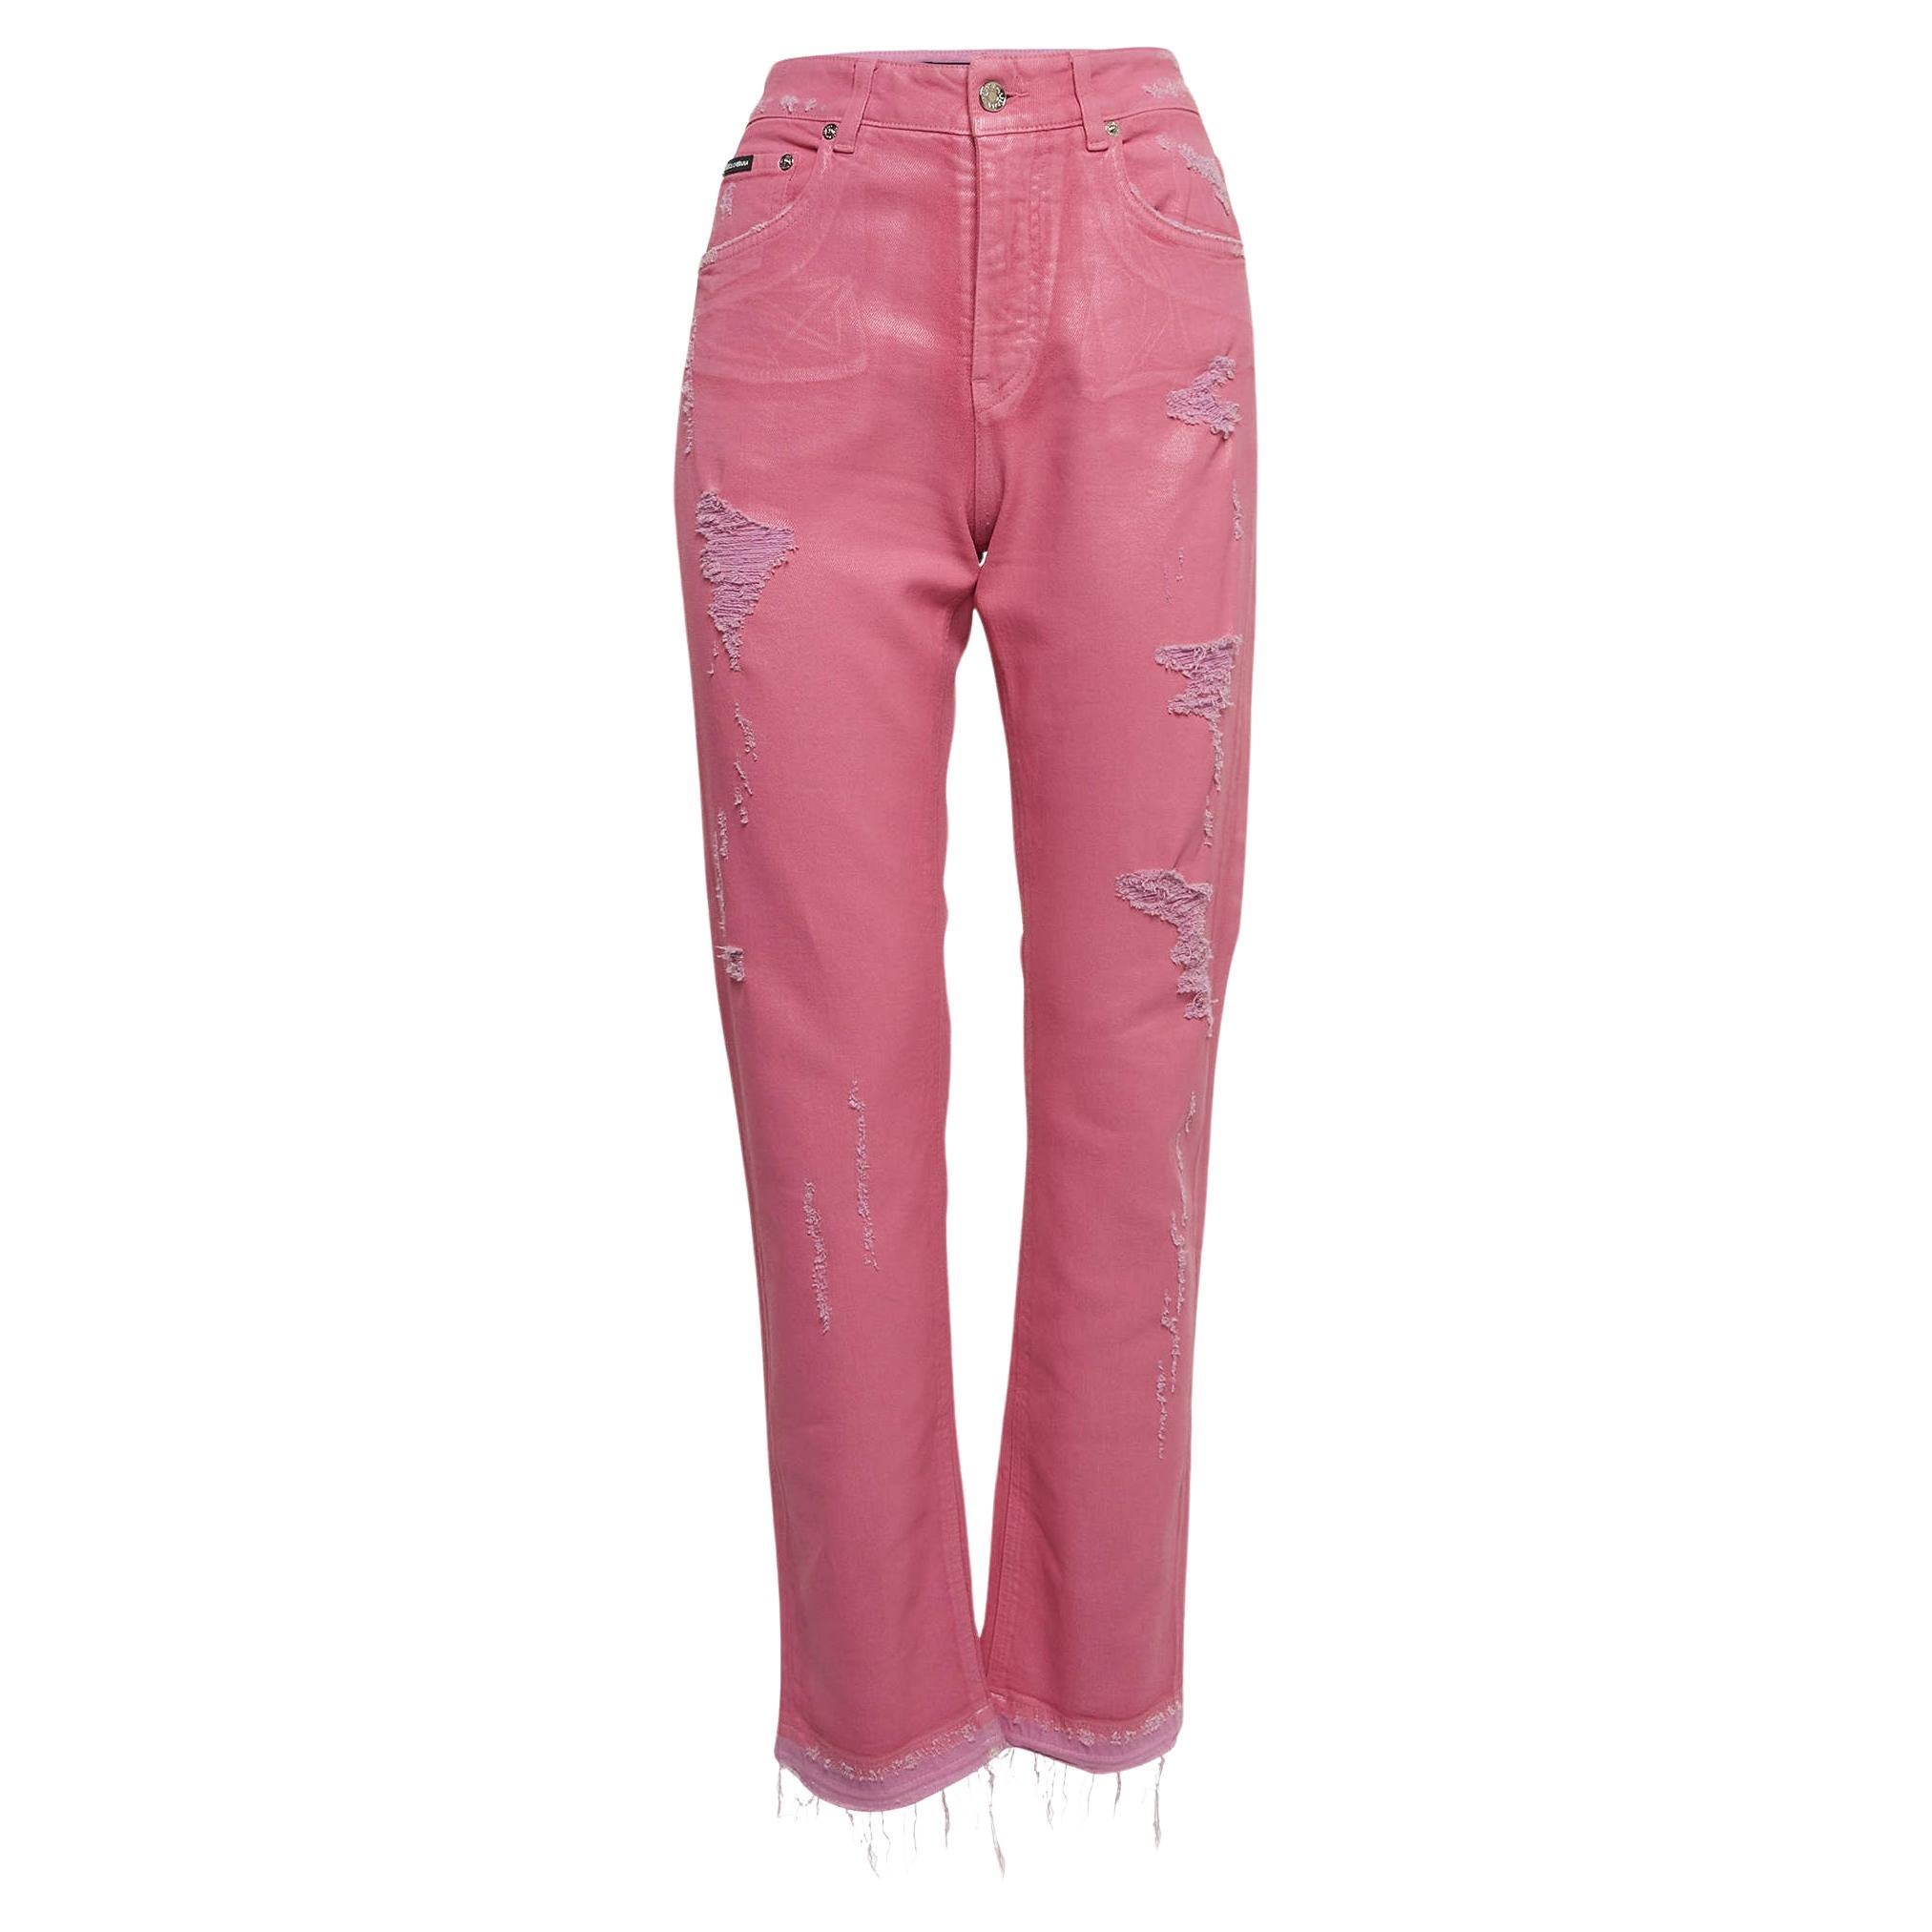 Dolce & Gabbana Pink Distressed Denim Straight Fit Jeans S Waist 27'' For Sale